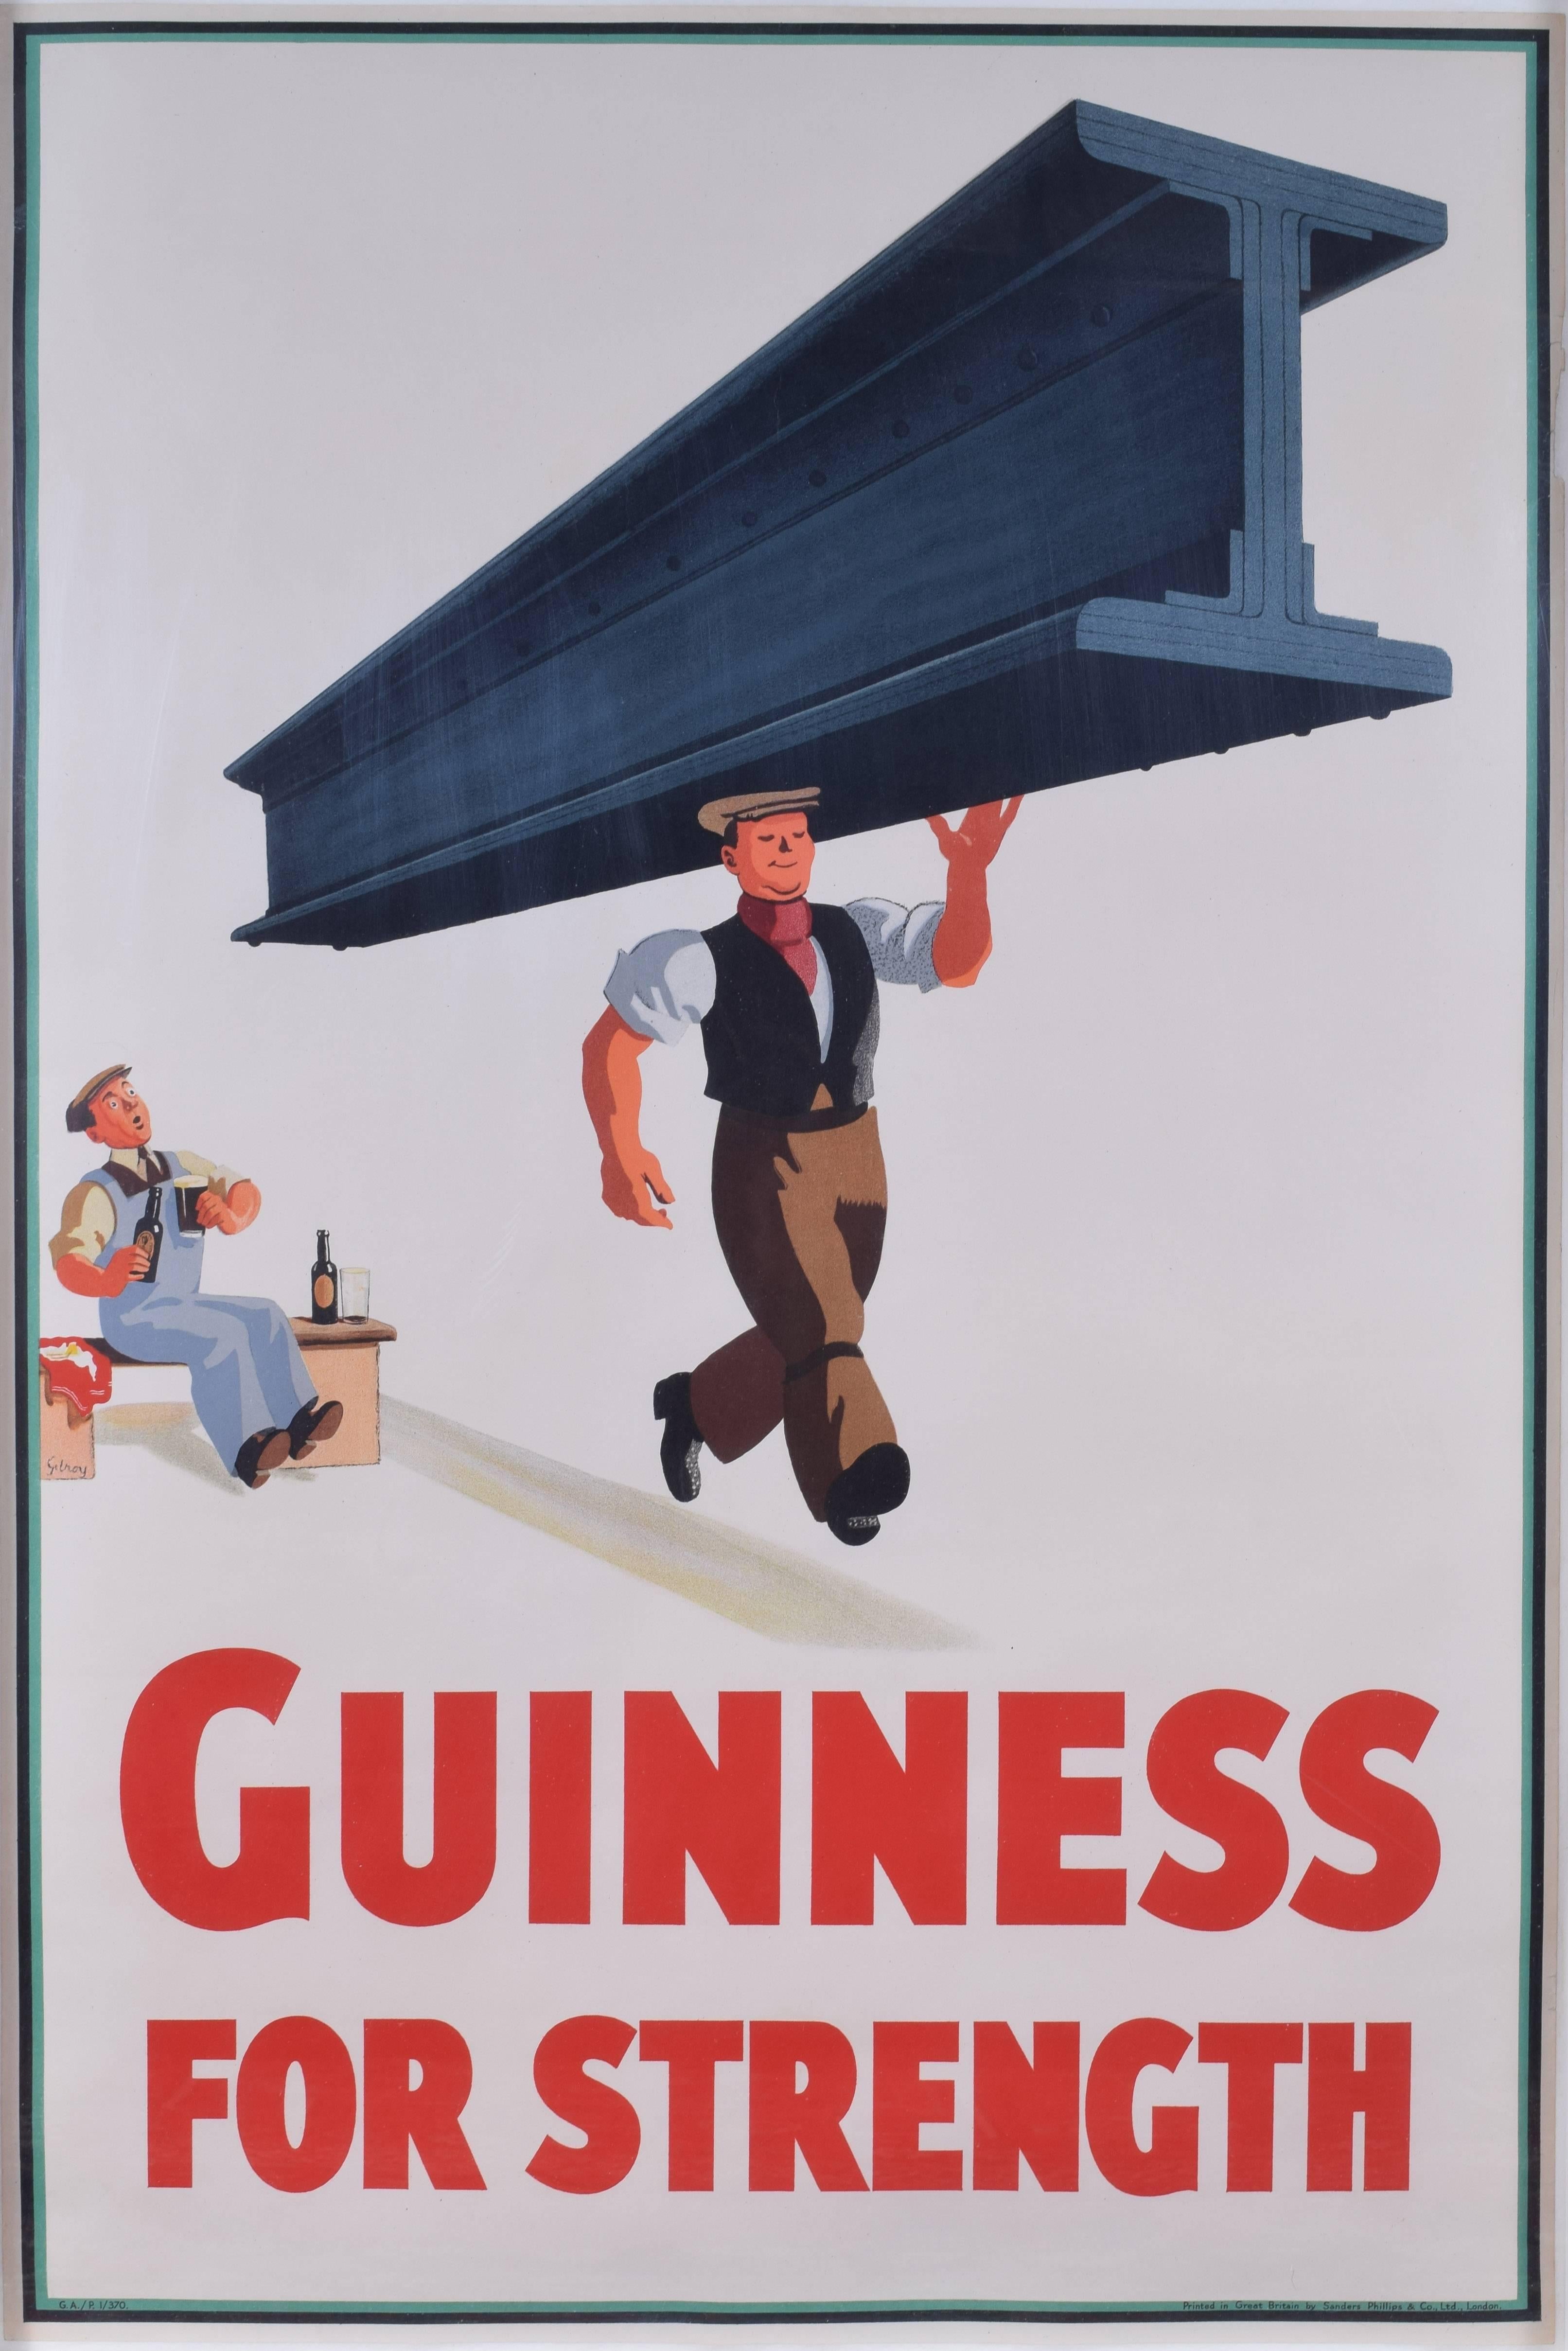 John Gilroy (1898-1985)
Guinness for Strength
c. 1930s
71x50cm

John Gilroy produced a large number of posters for Guinness, on the theme that the ongoing Guinness advertising slogan that Guinness is Good for You. Here a worker, fortified by a glass